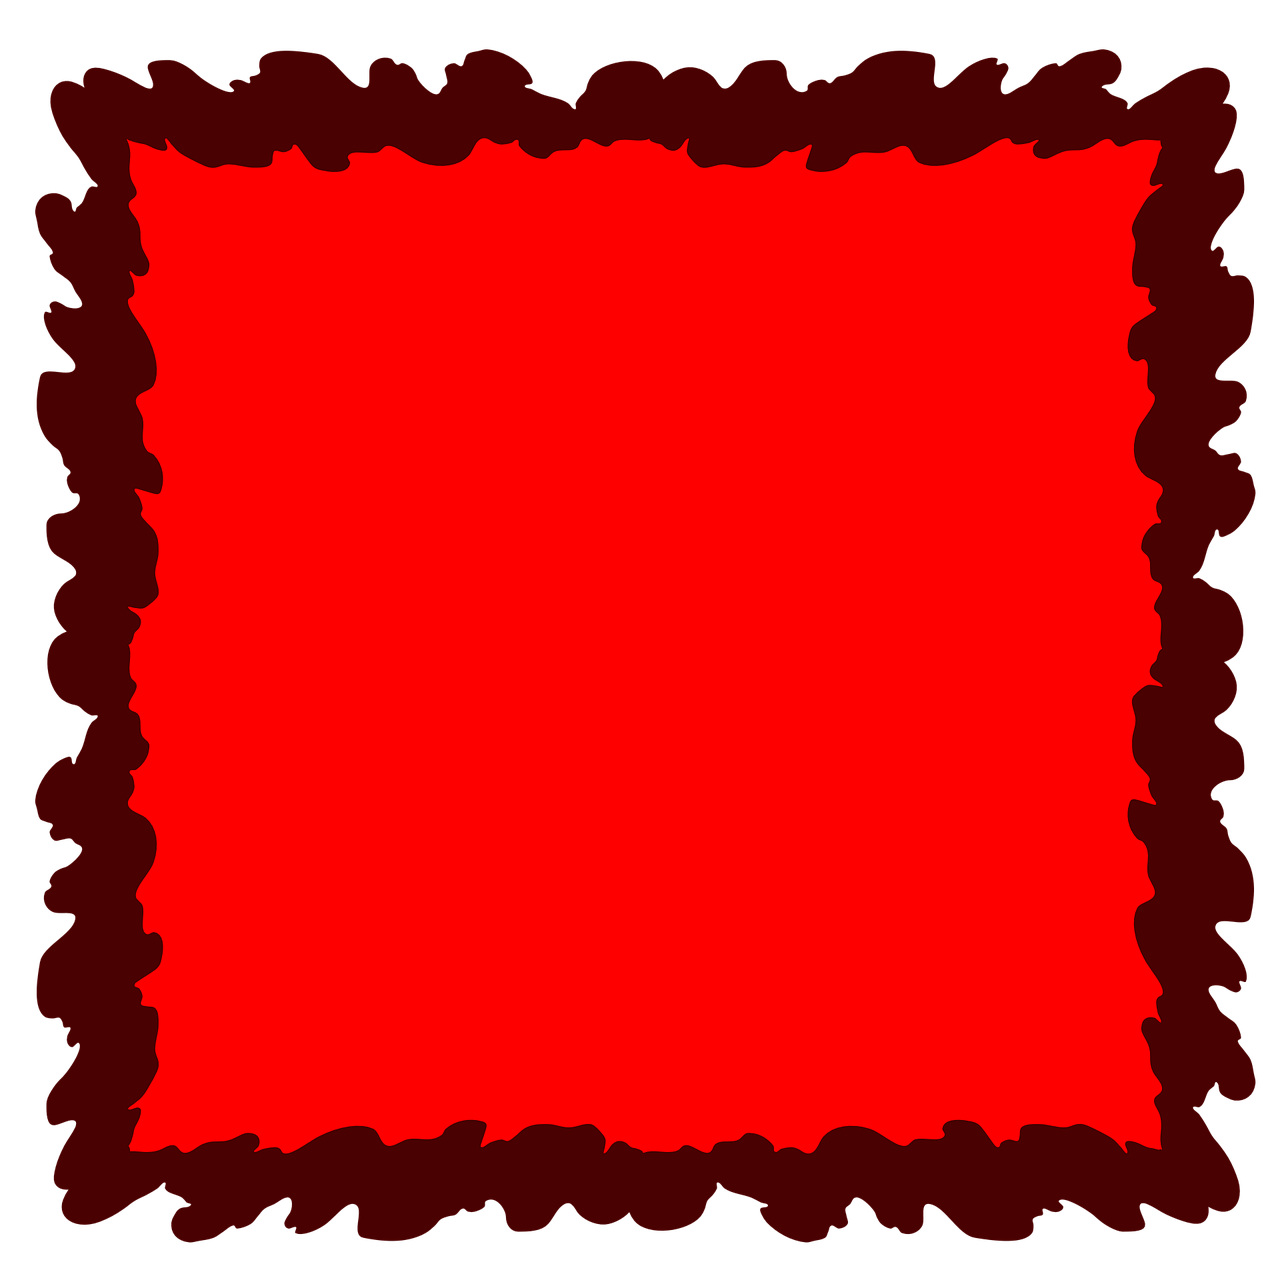 red frame background free photo